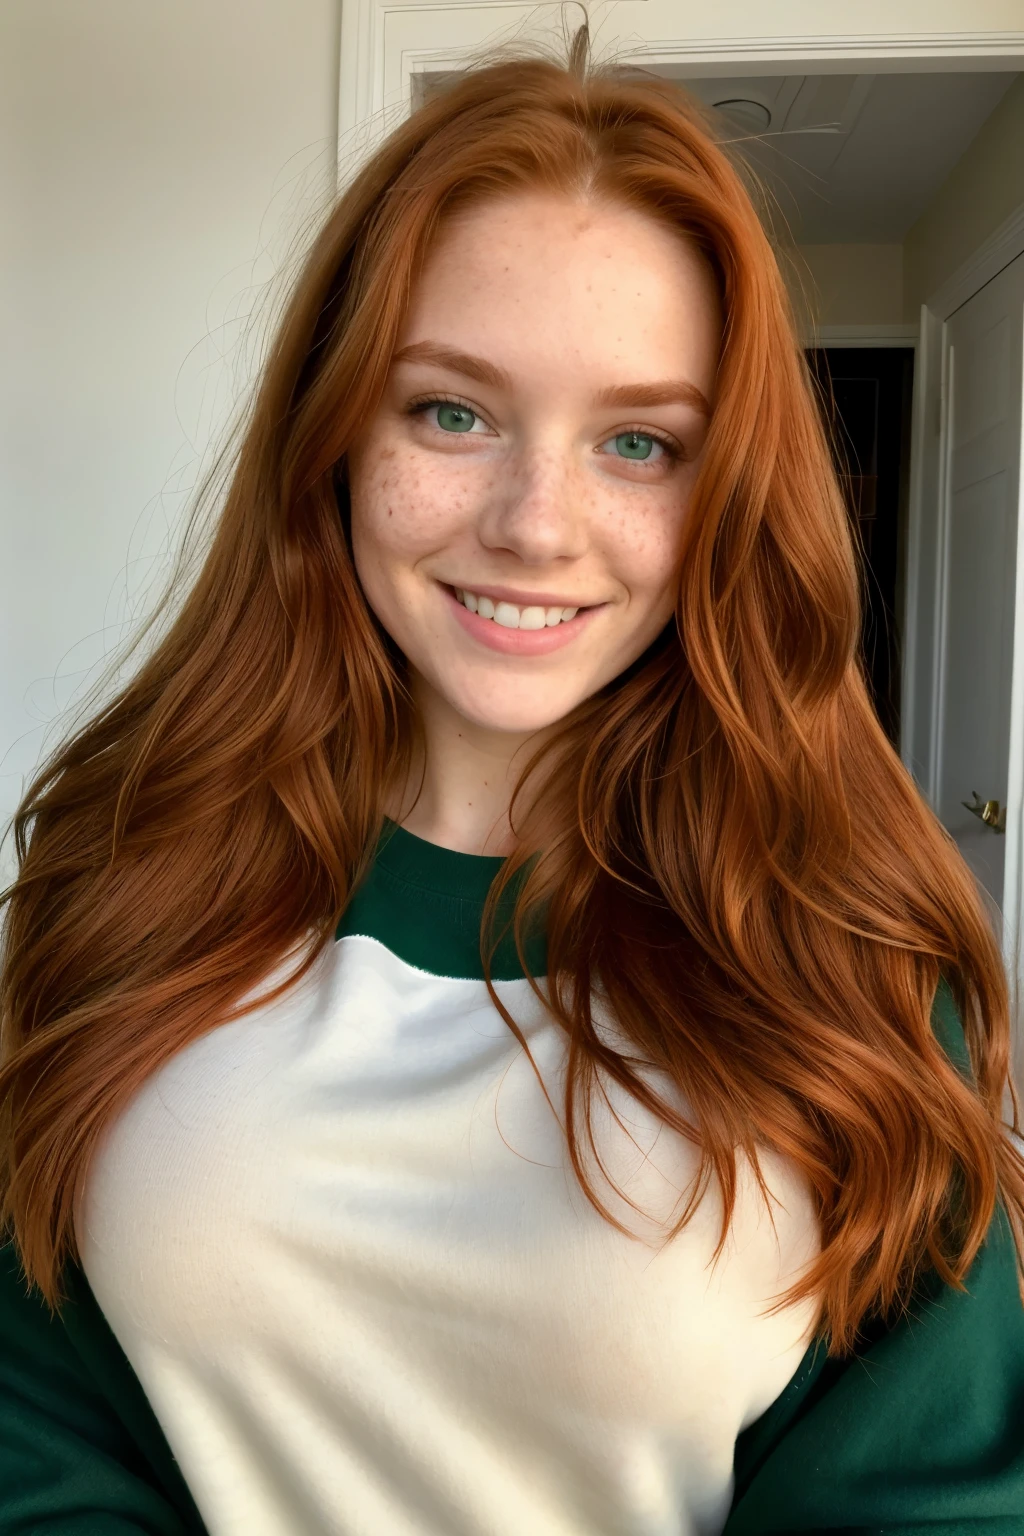 ((best quality)), ((masterpiece)), (detailed), perfect face, redhead, big breast, long hair, smiling, green eyes, freckles, wearing university sweater
